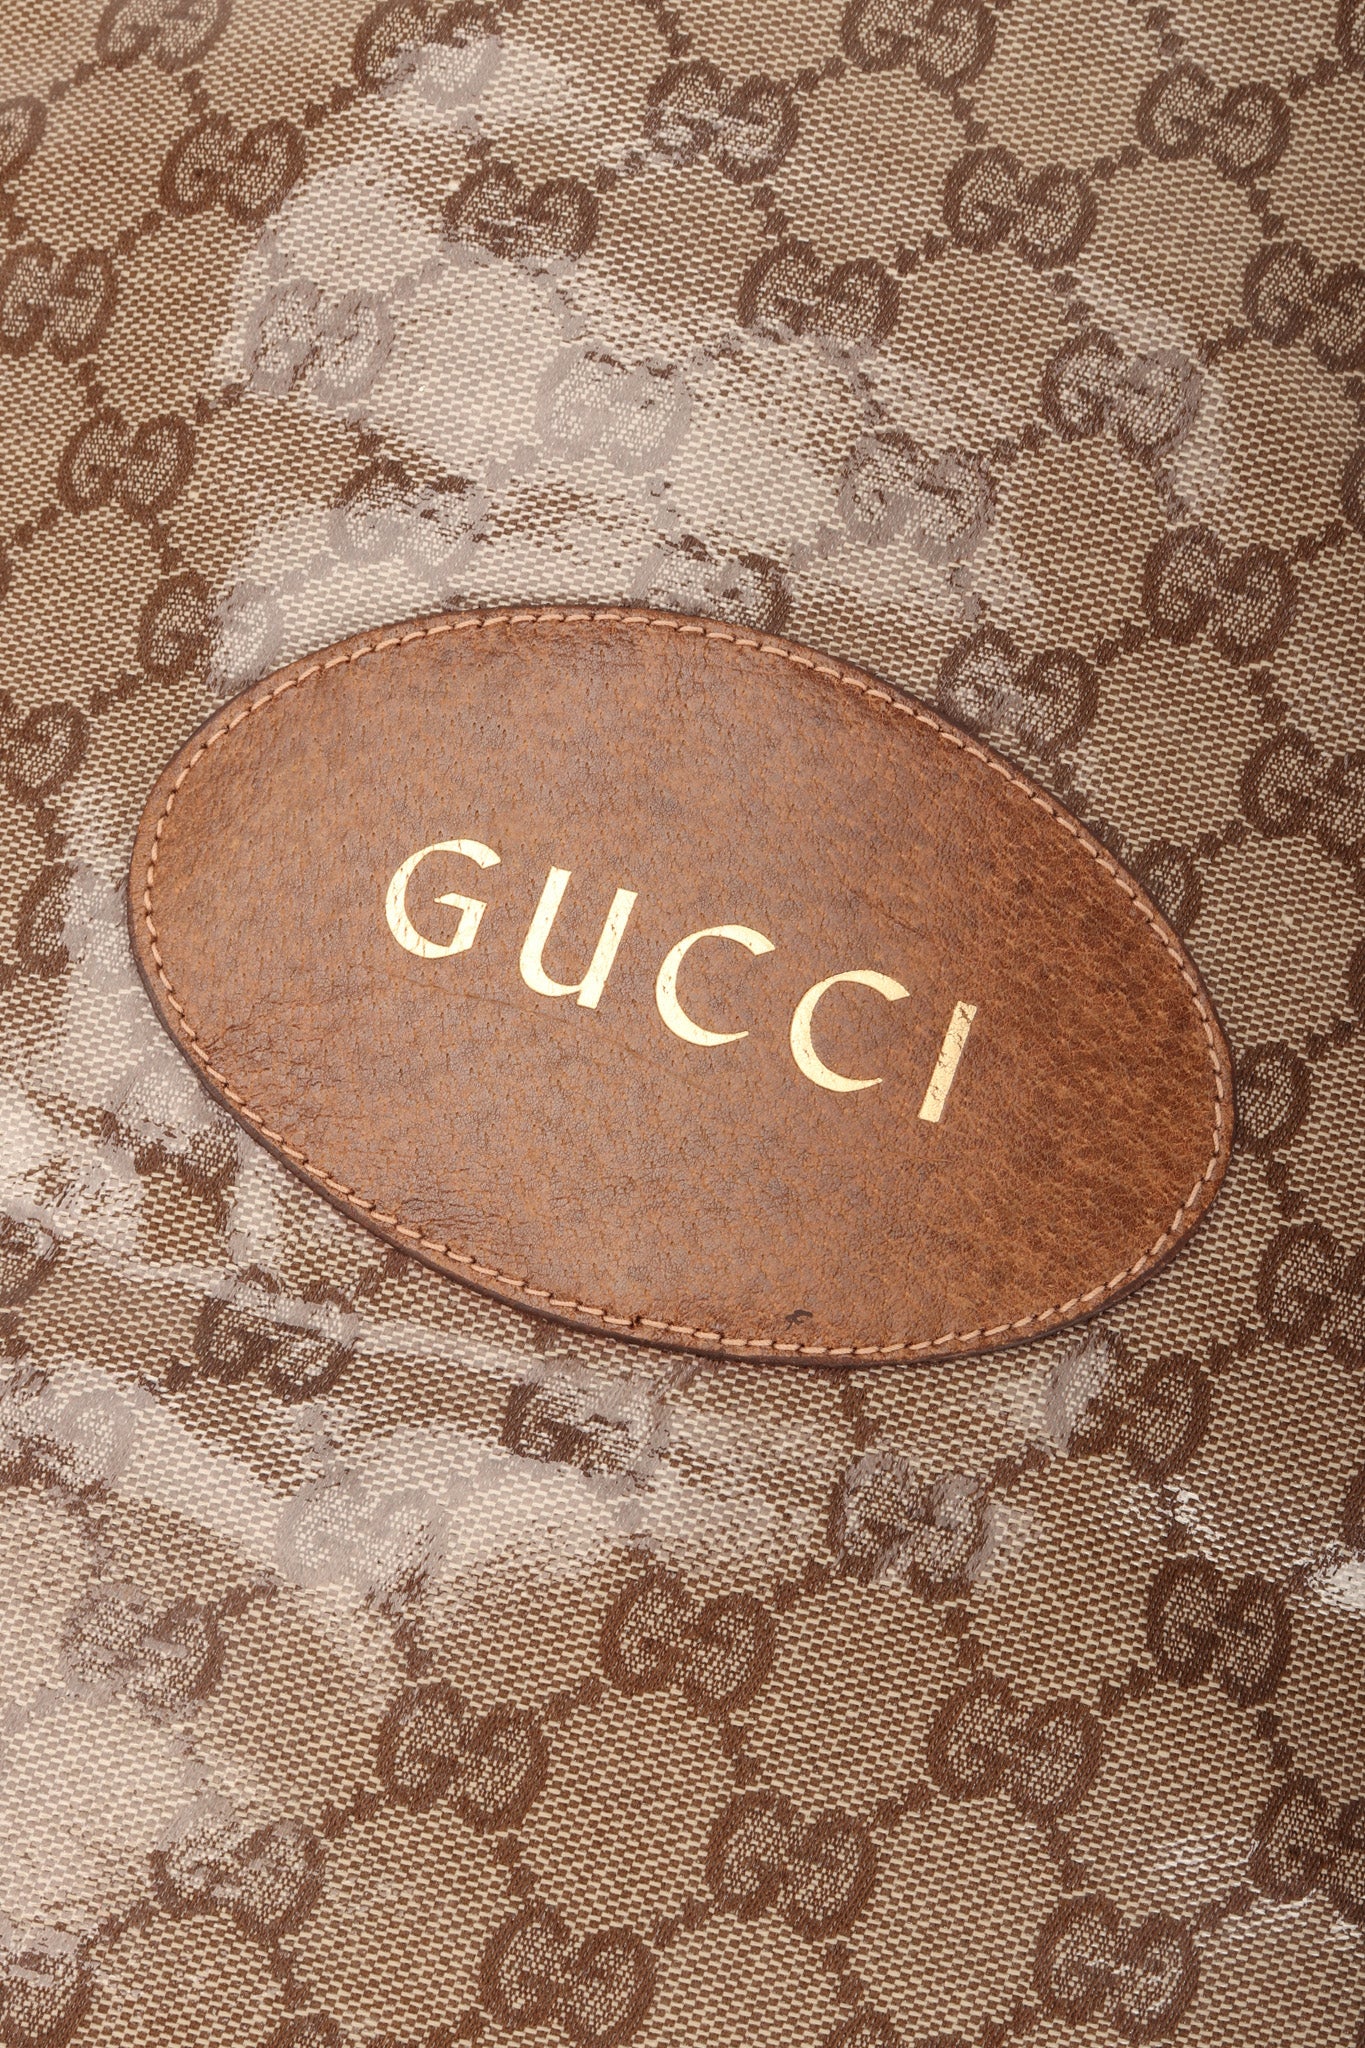 Recess Los Angeles Vintage Gucci Monogram Travel Shoe Tote Bag Coated Canvas Leather Handle Gold Letter Pressing